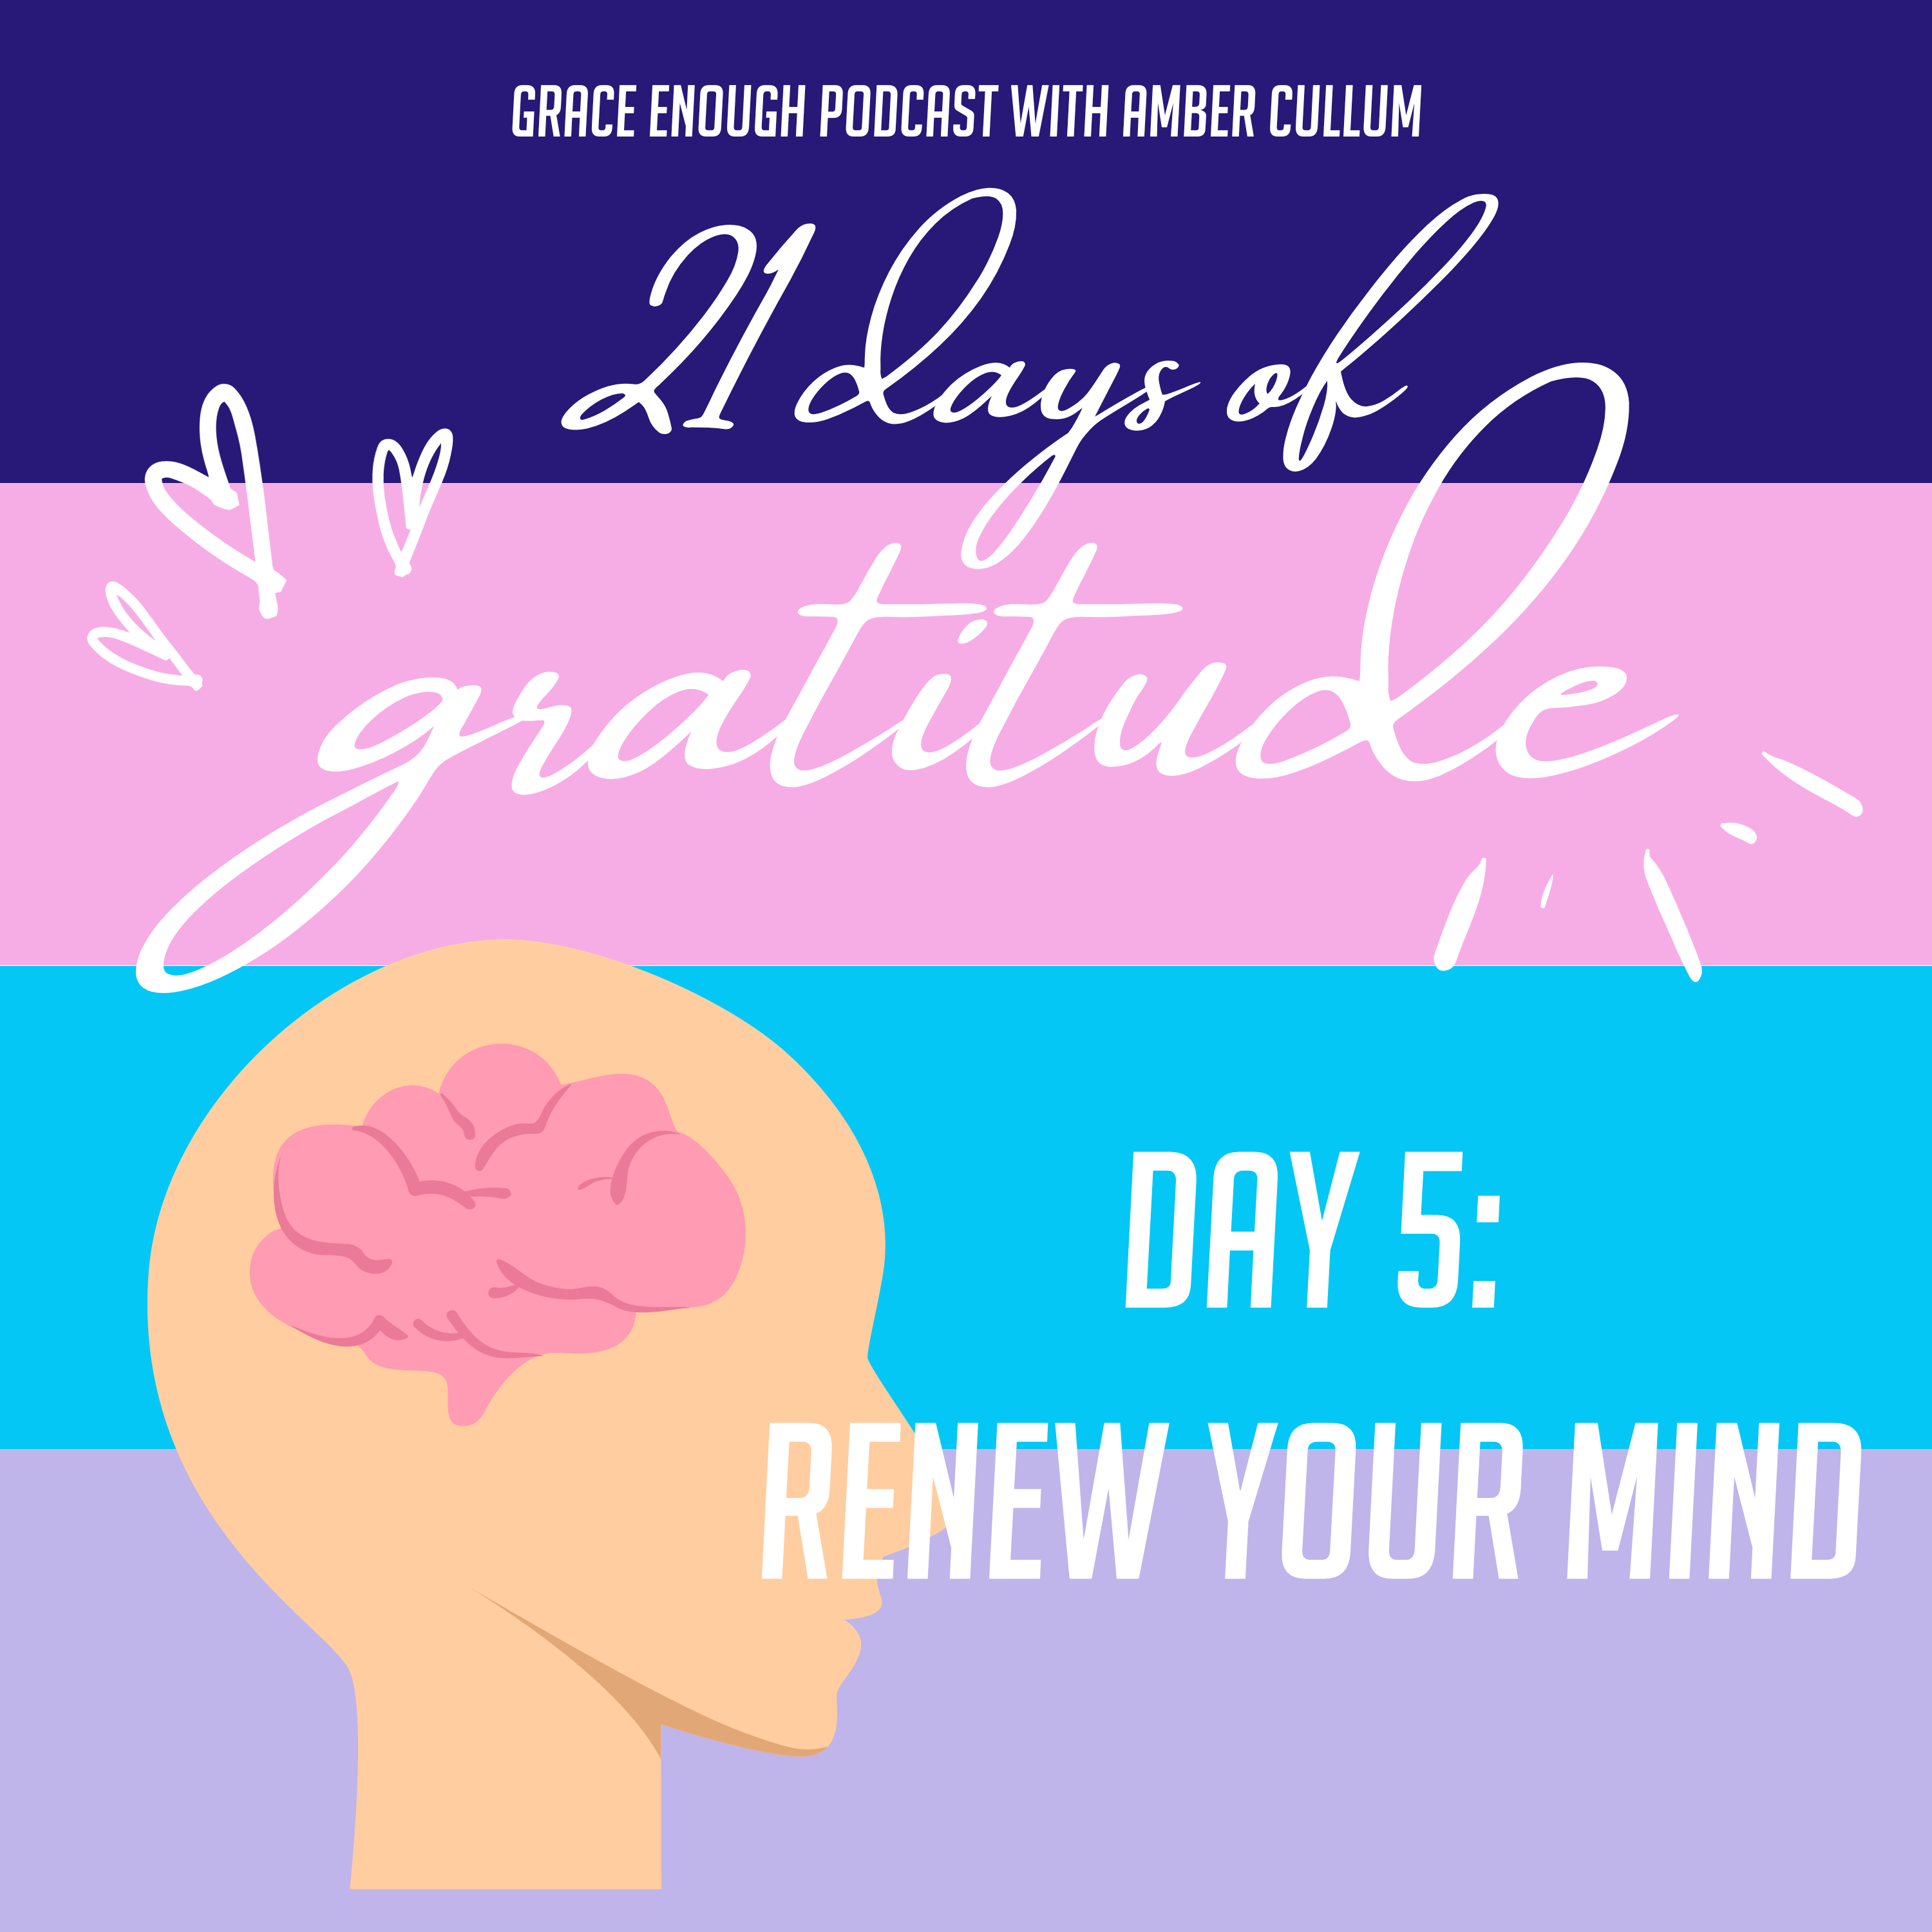 21 Days of Gratitude: Day 5, Renew Your Mind